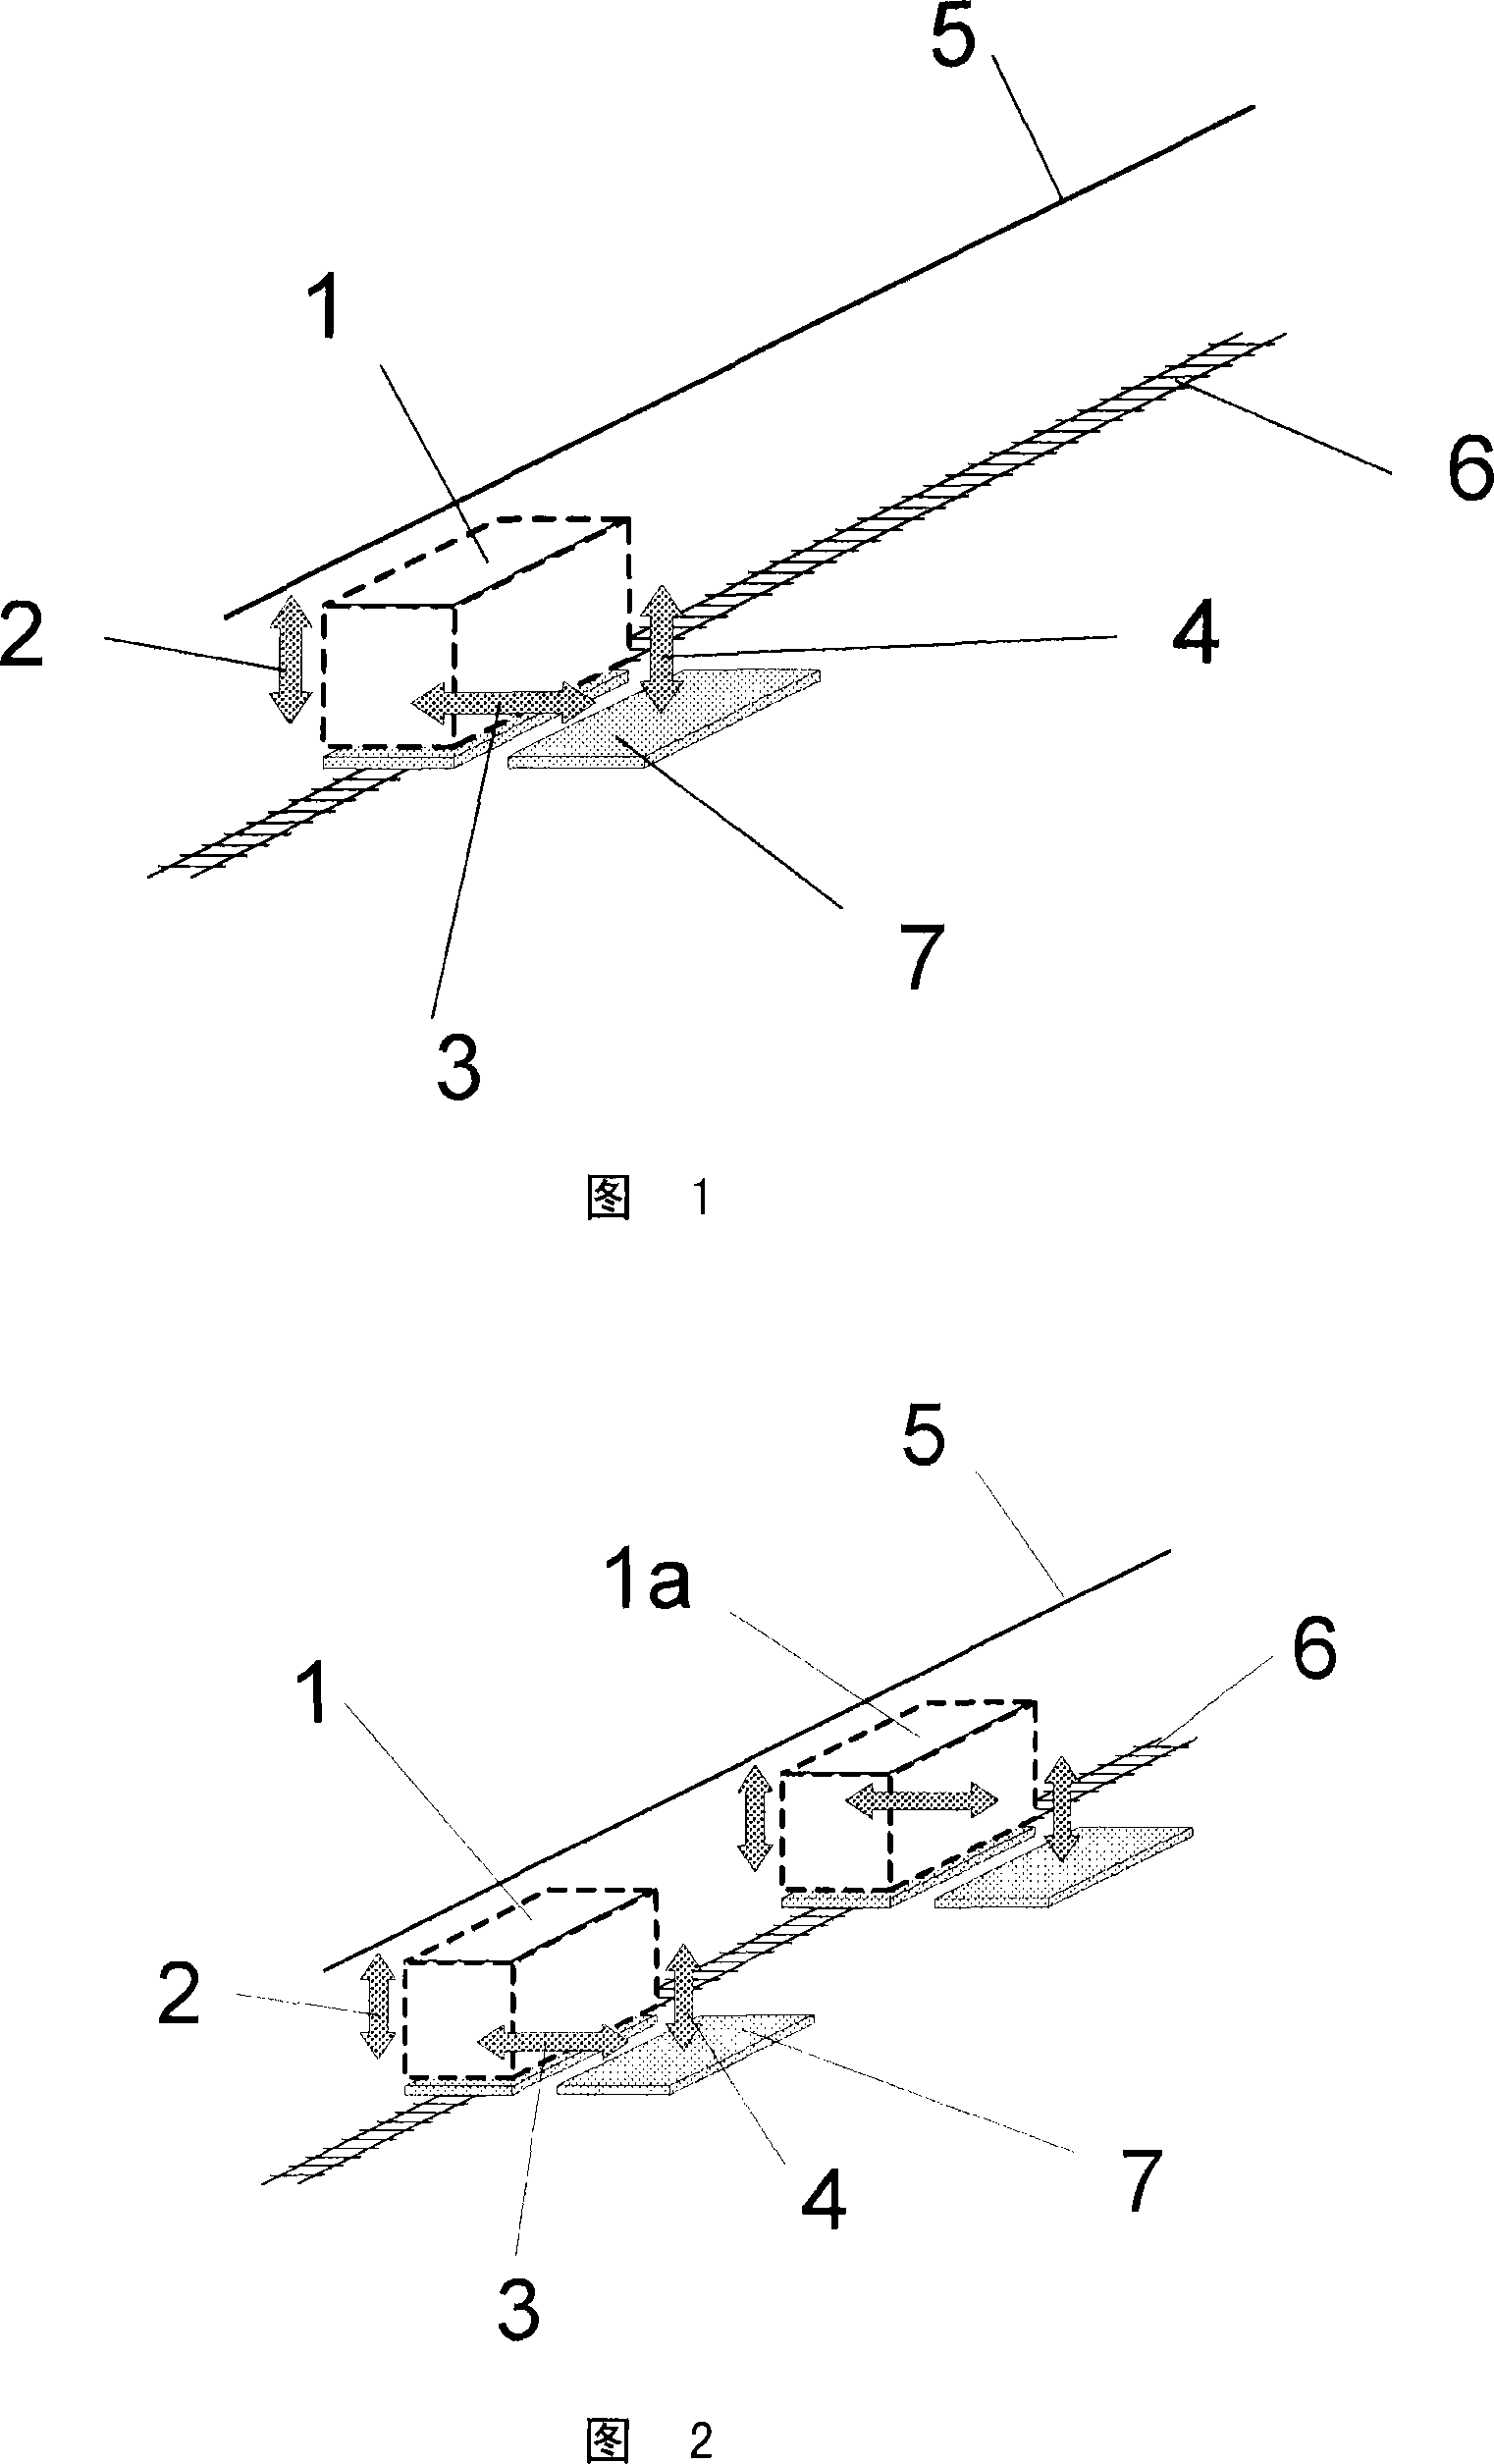 Method and reloading system for reloading or loading at least one loading unit